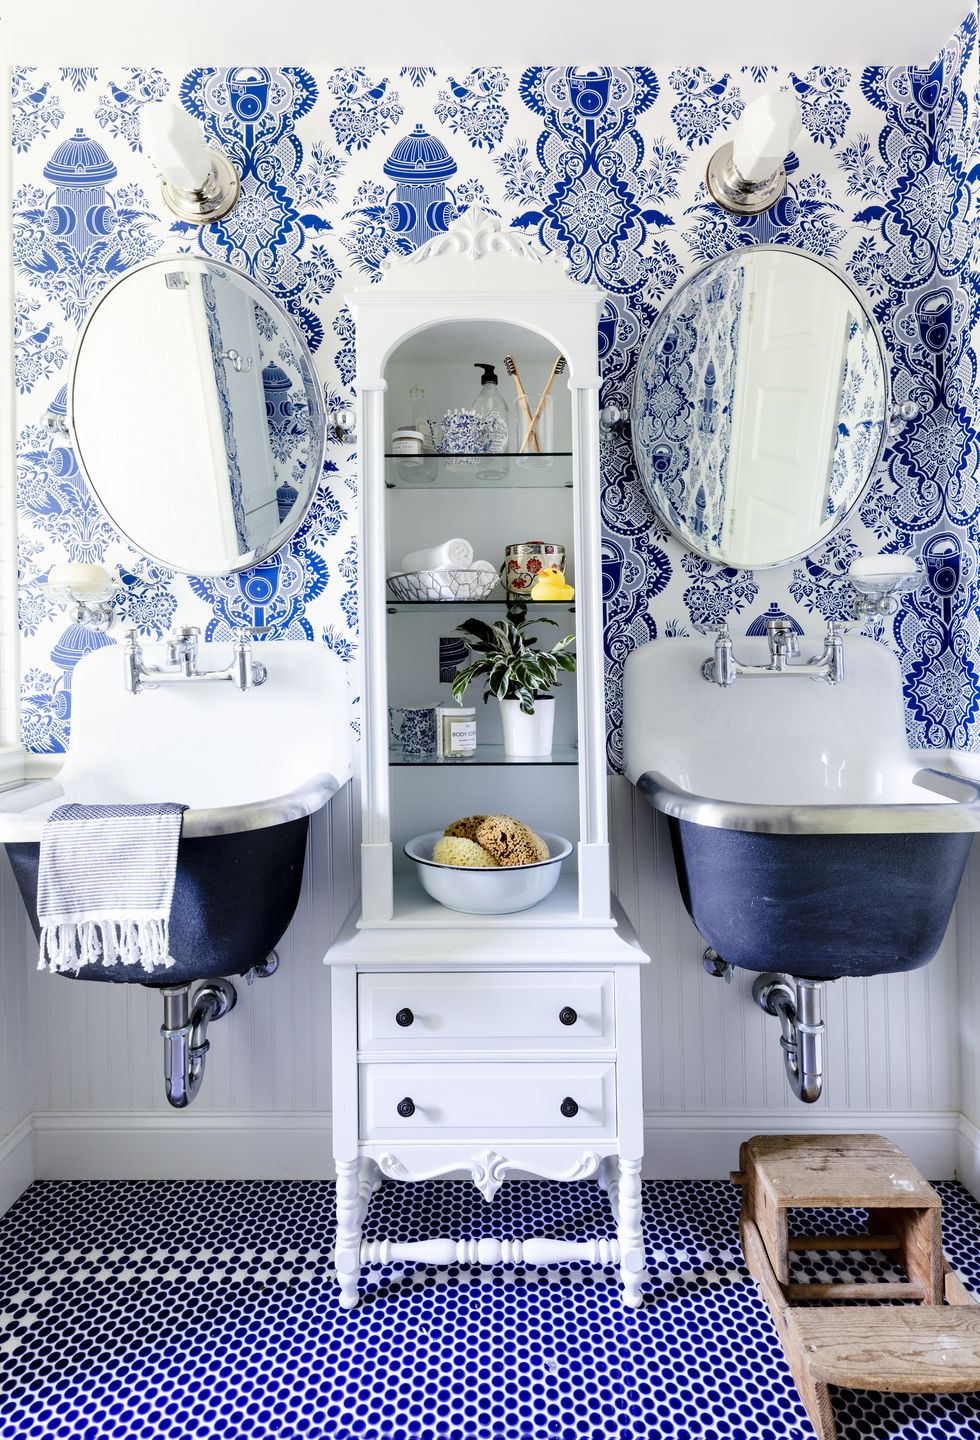 23 Small Bathroom Organization Hacks to Save Space - She Tried What